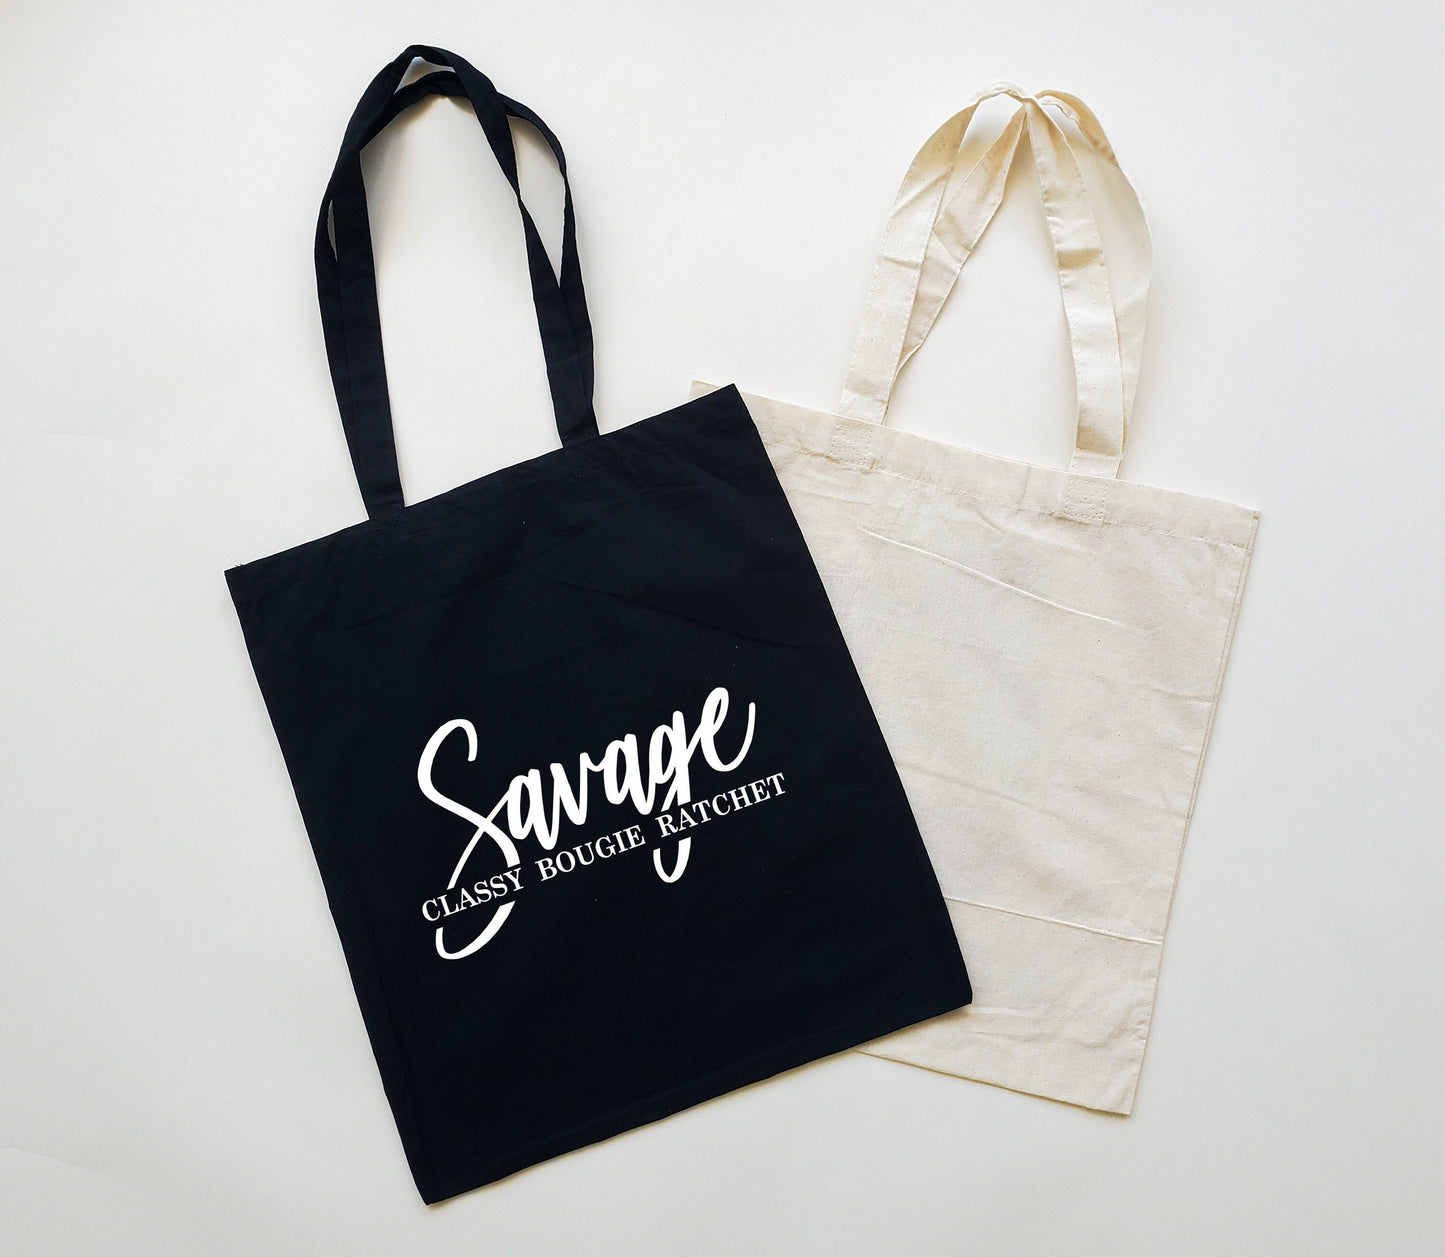 Savage (classy, bougie, ratchet) Canvas Tote Bag